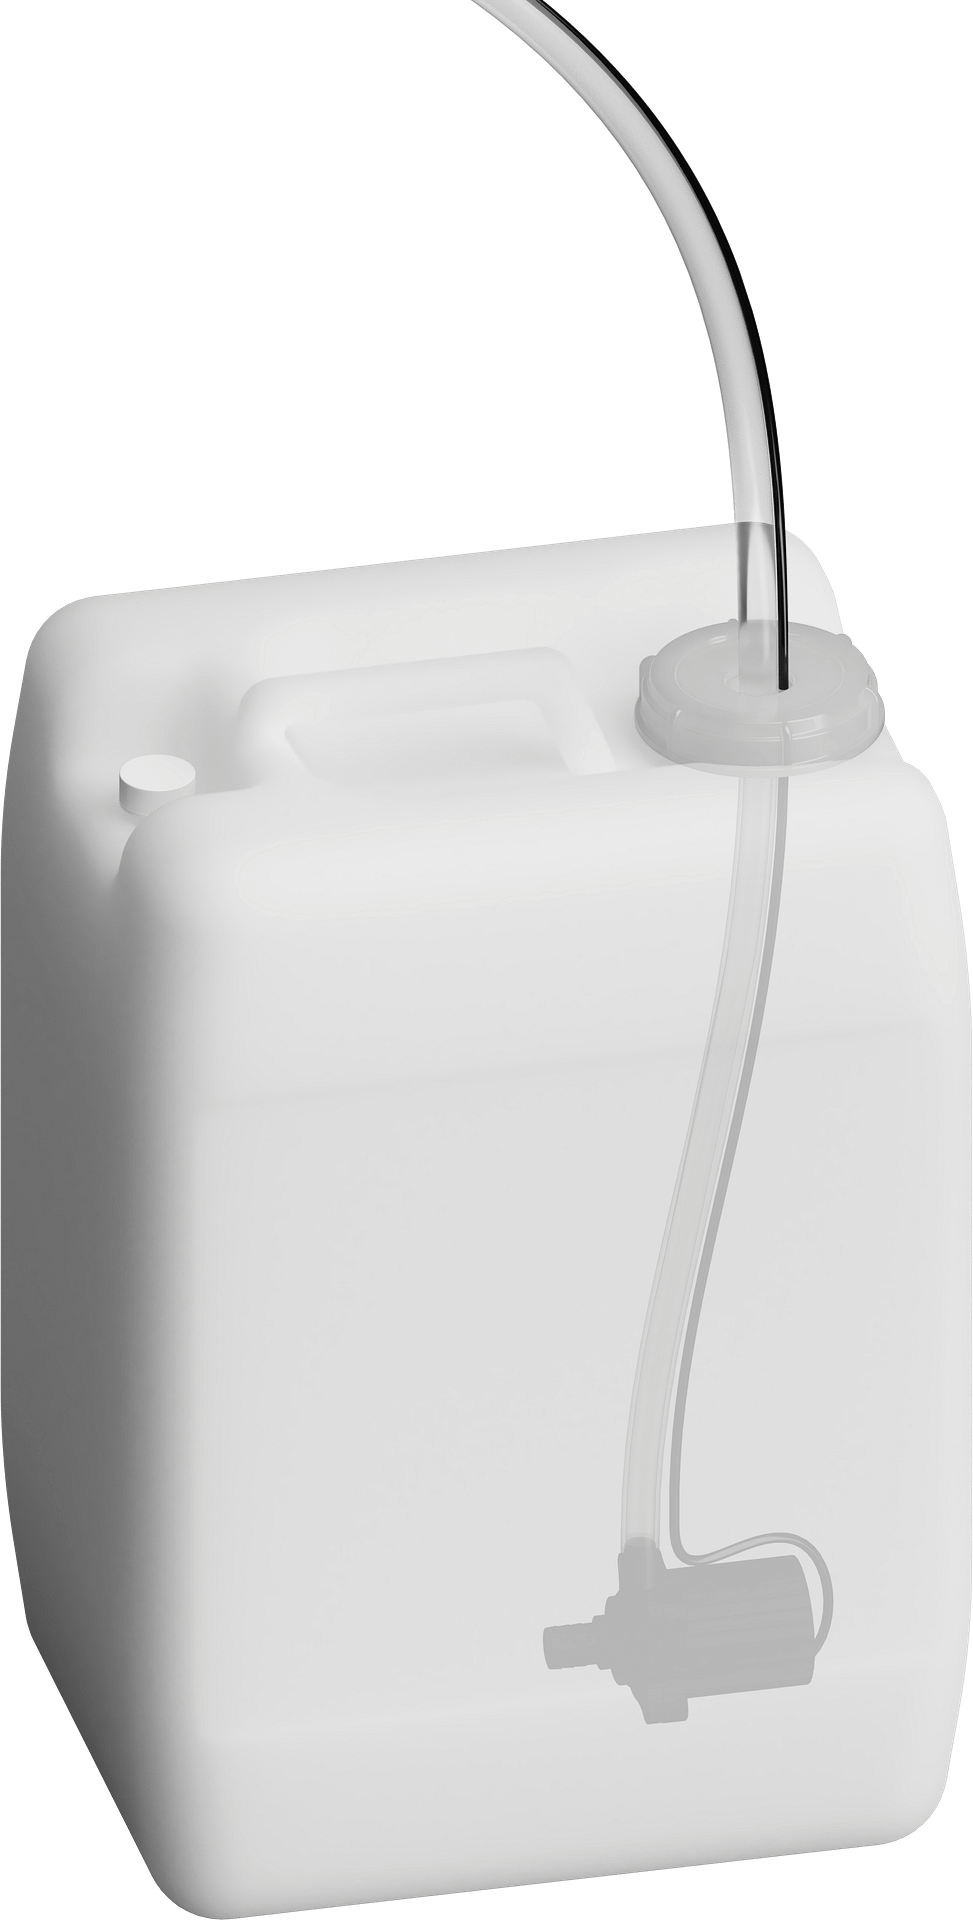 X Stream Designs - X-AUX-RESERVOIR - Optional External Auxiliary Fluid Reservoir Provides Over 11 Times More Dome Washing Fluid for The XClear Model Enclosure. Ideal for Installation Locations Tough To Get To Or In Remote Areas.